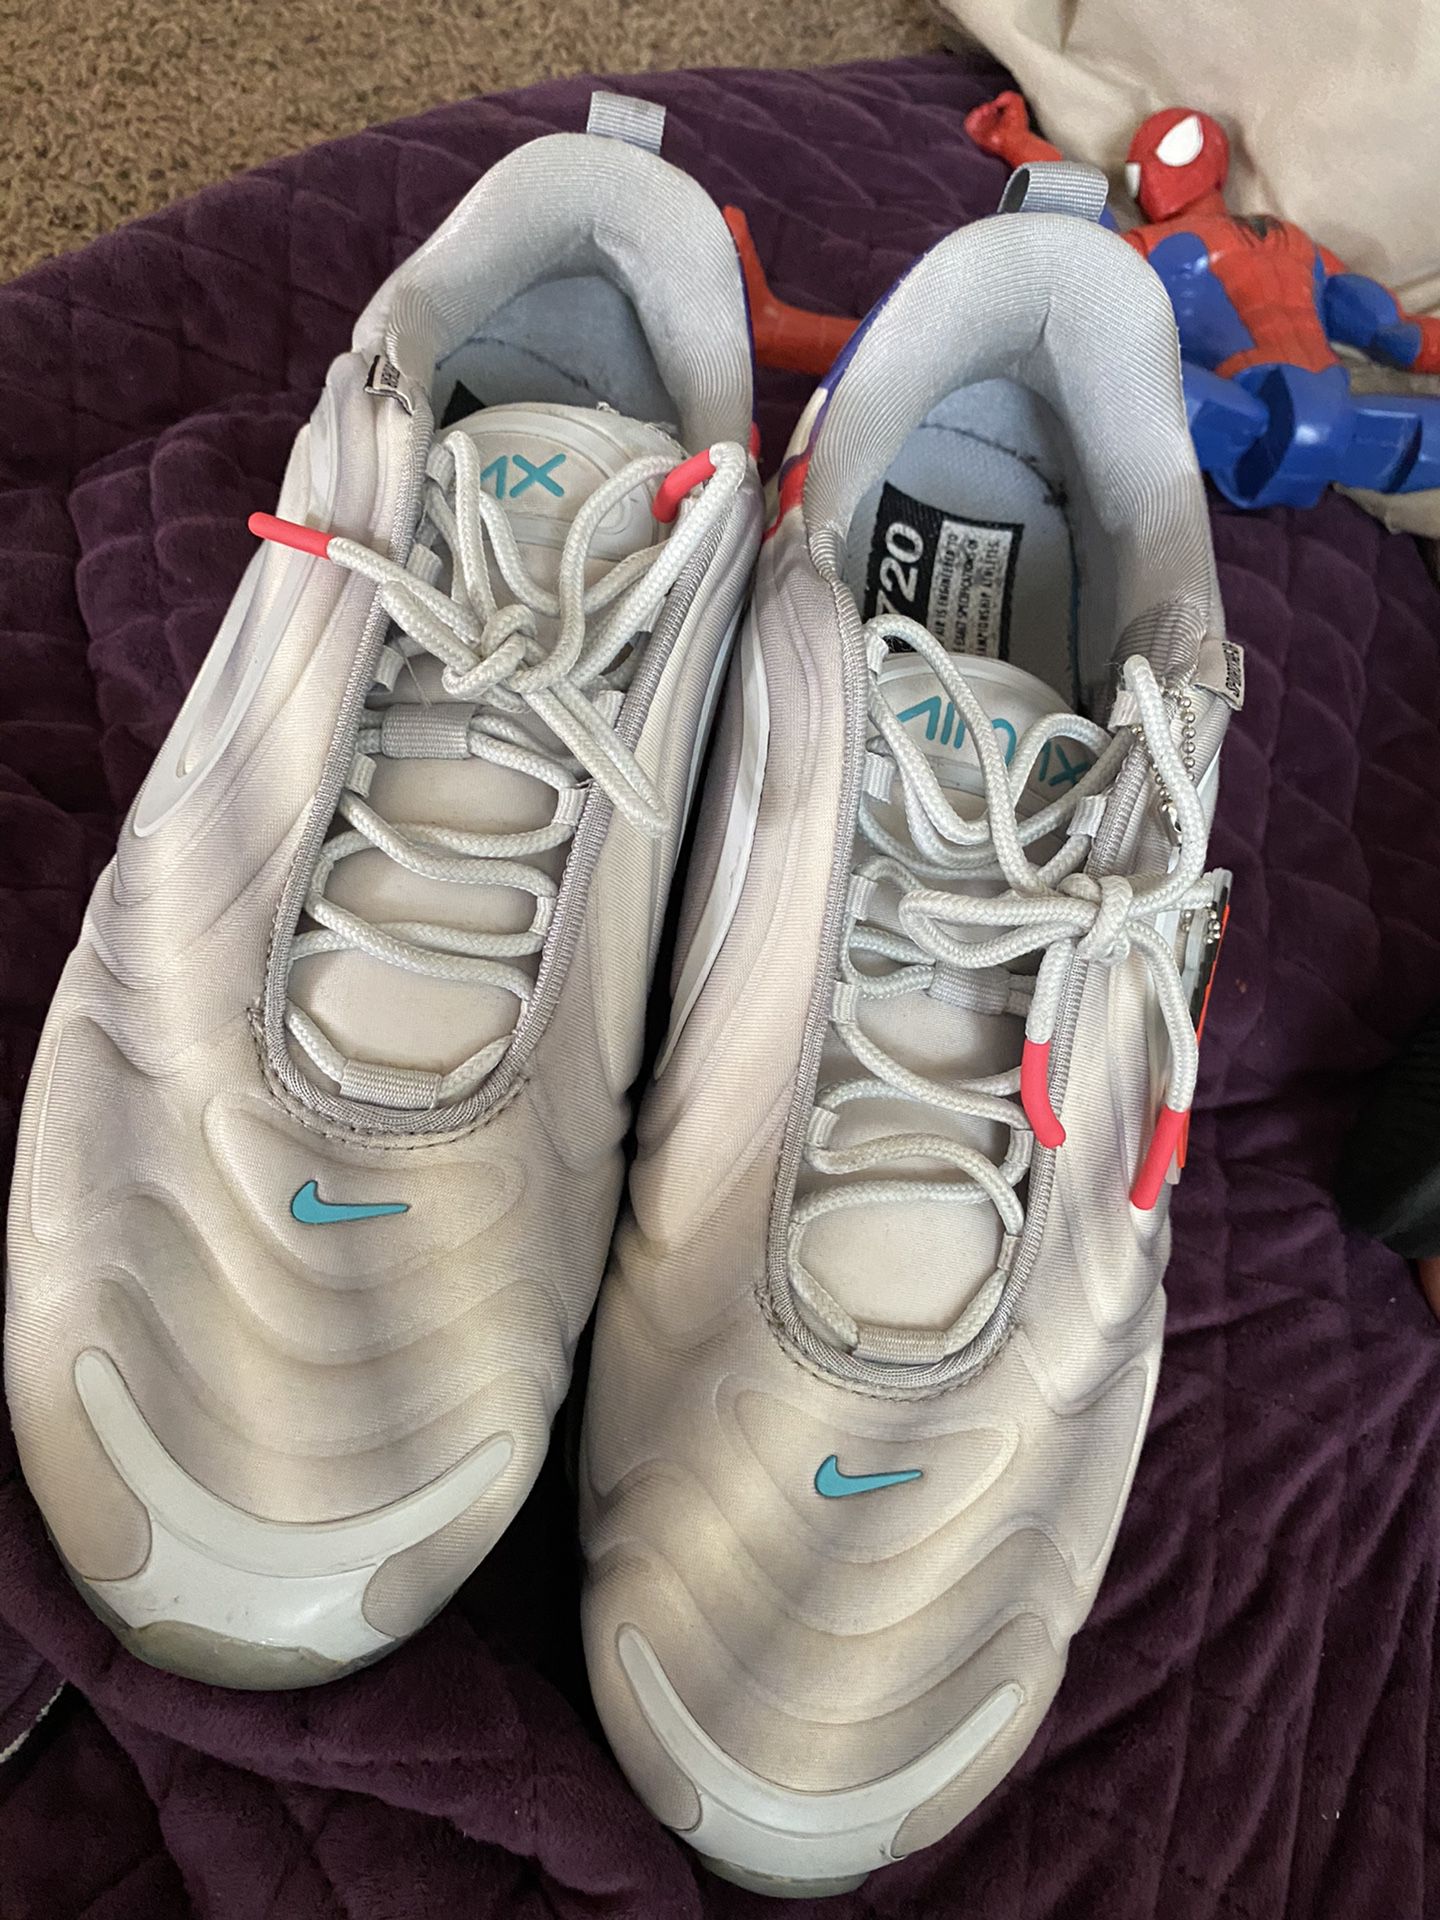 Air max 720 size 11 and 8/10 condition